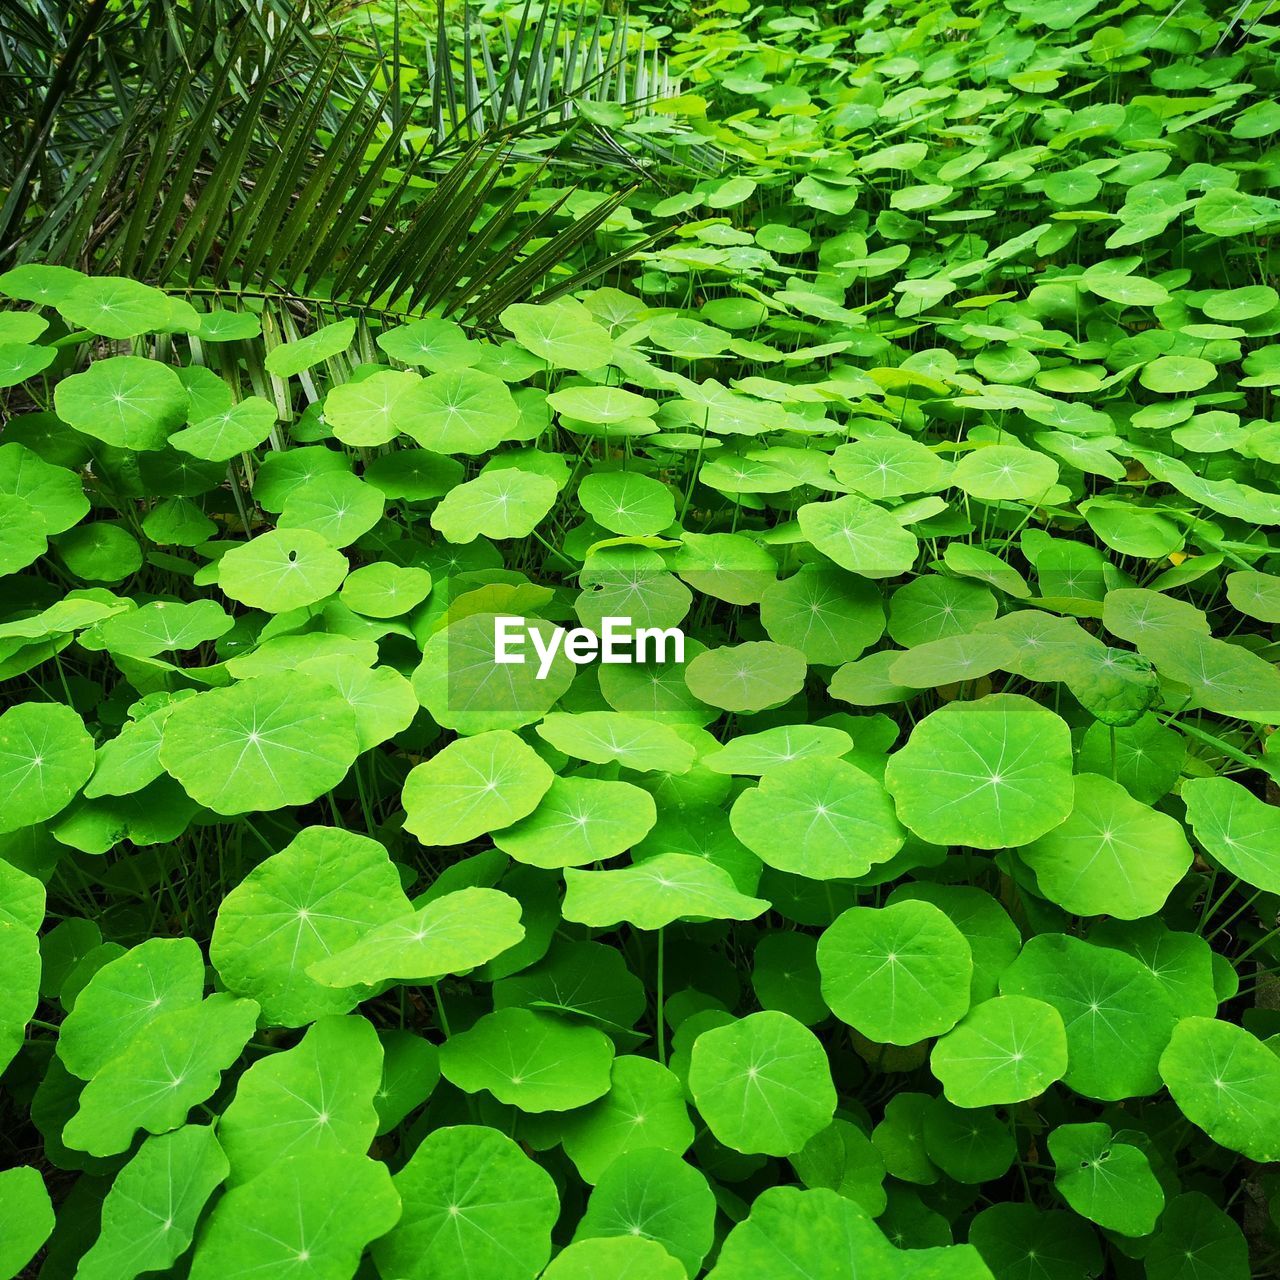 green, leaf, plant, plant part, growth, water, nature, beauty in nature, backgrounds, full frame, no people, tranquility, day, freshness, wet, floating, outdoors, floating on water, close-up, high angle view, water lily, aquatic plant, flower, drop, foliage, grass, lake, lush foliage, leaves, vegetation